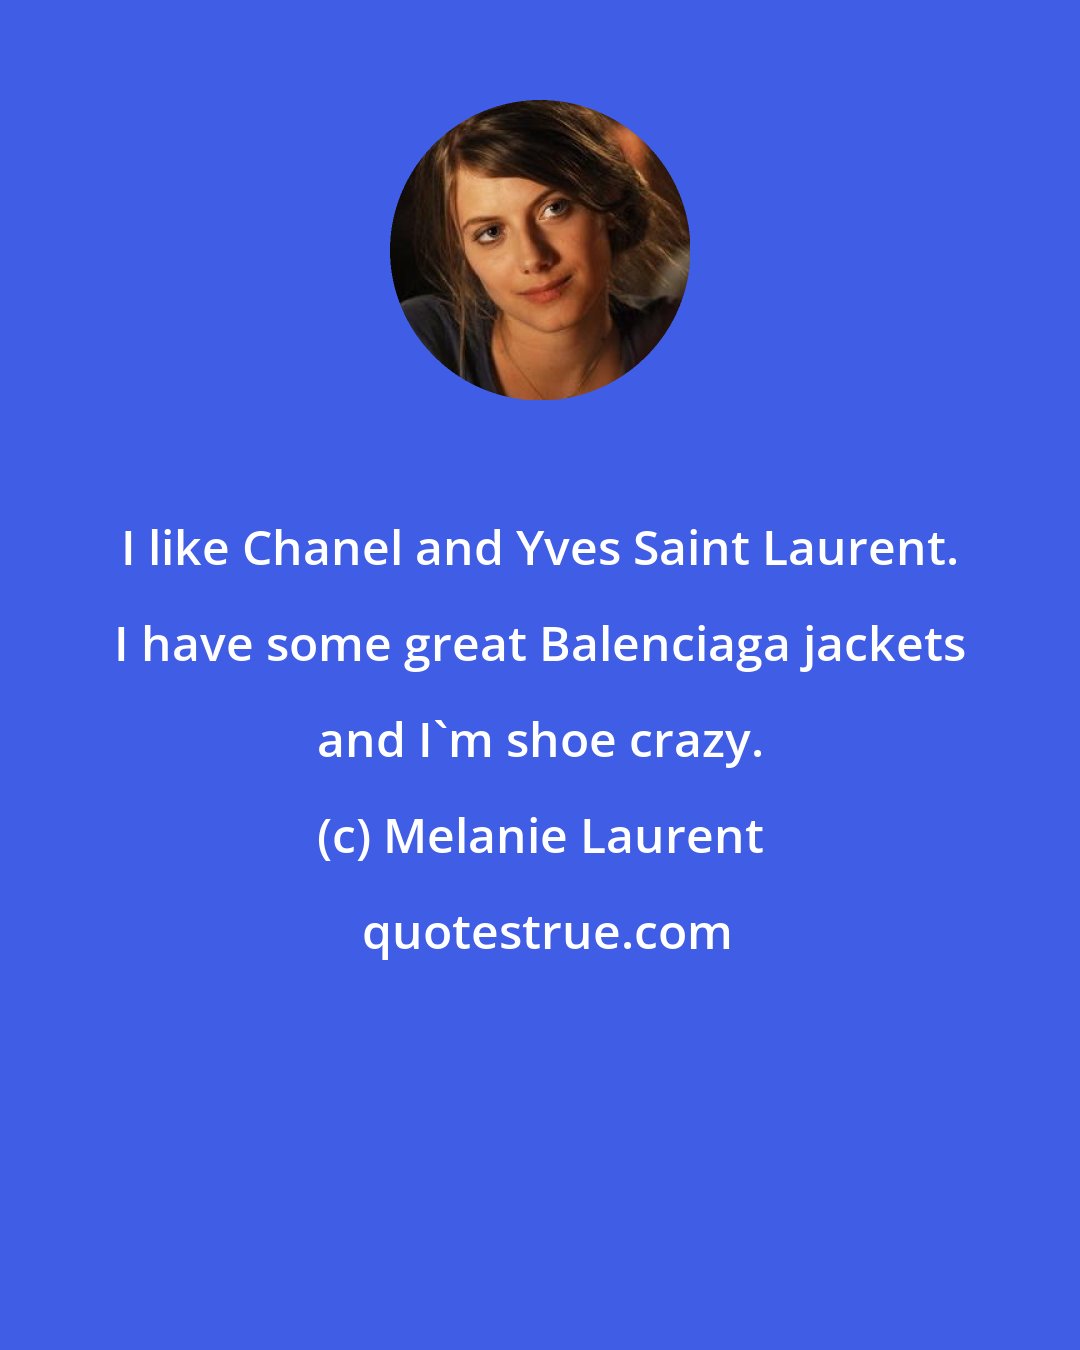 Melanie Laurent: I like Chanel and Yves Saint Laurent. I have some great Balenciaga jackets and I'm shoe crazy.